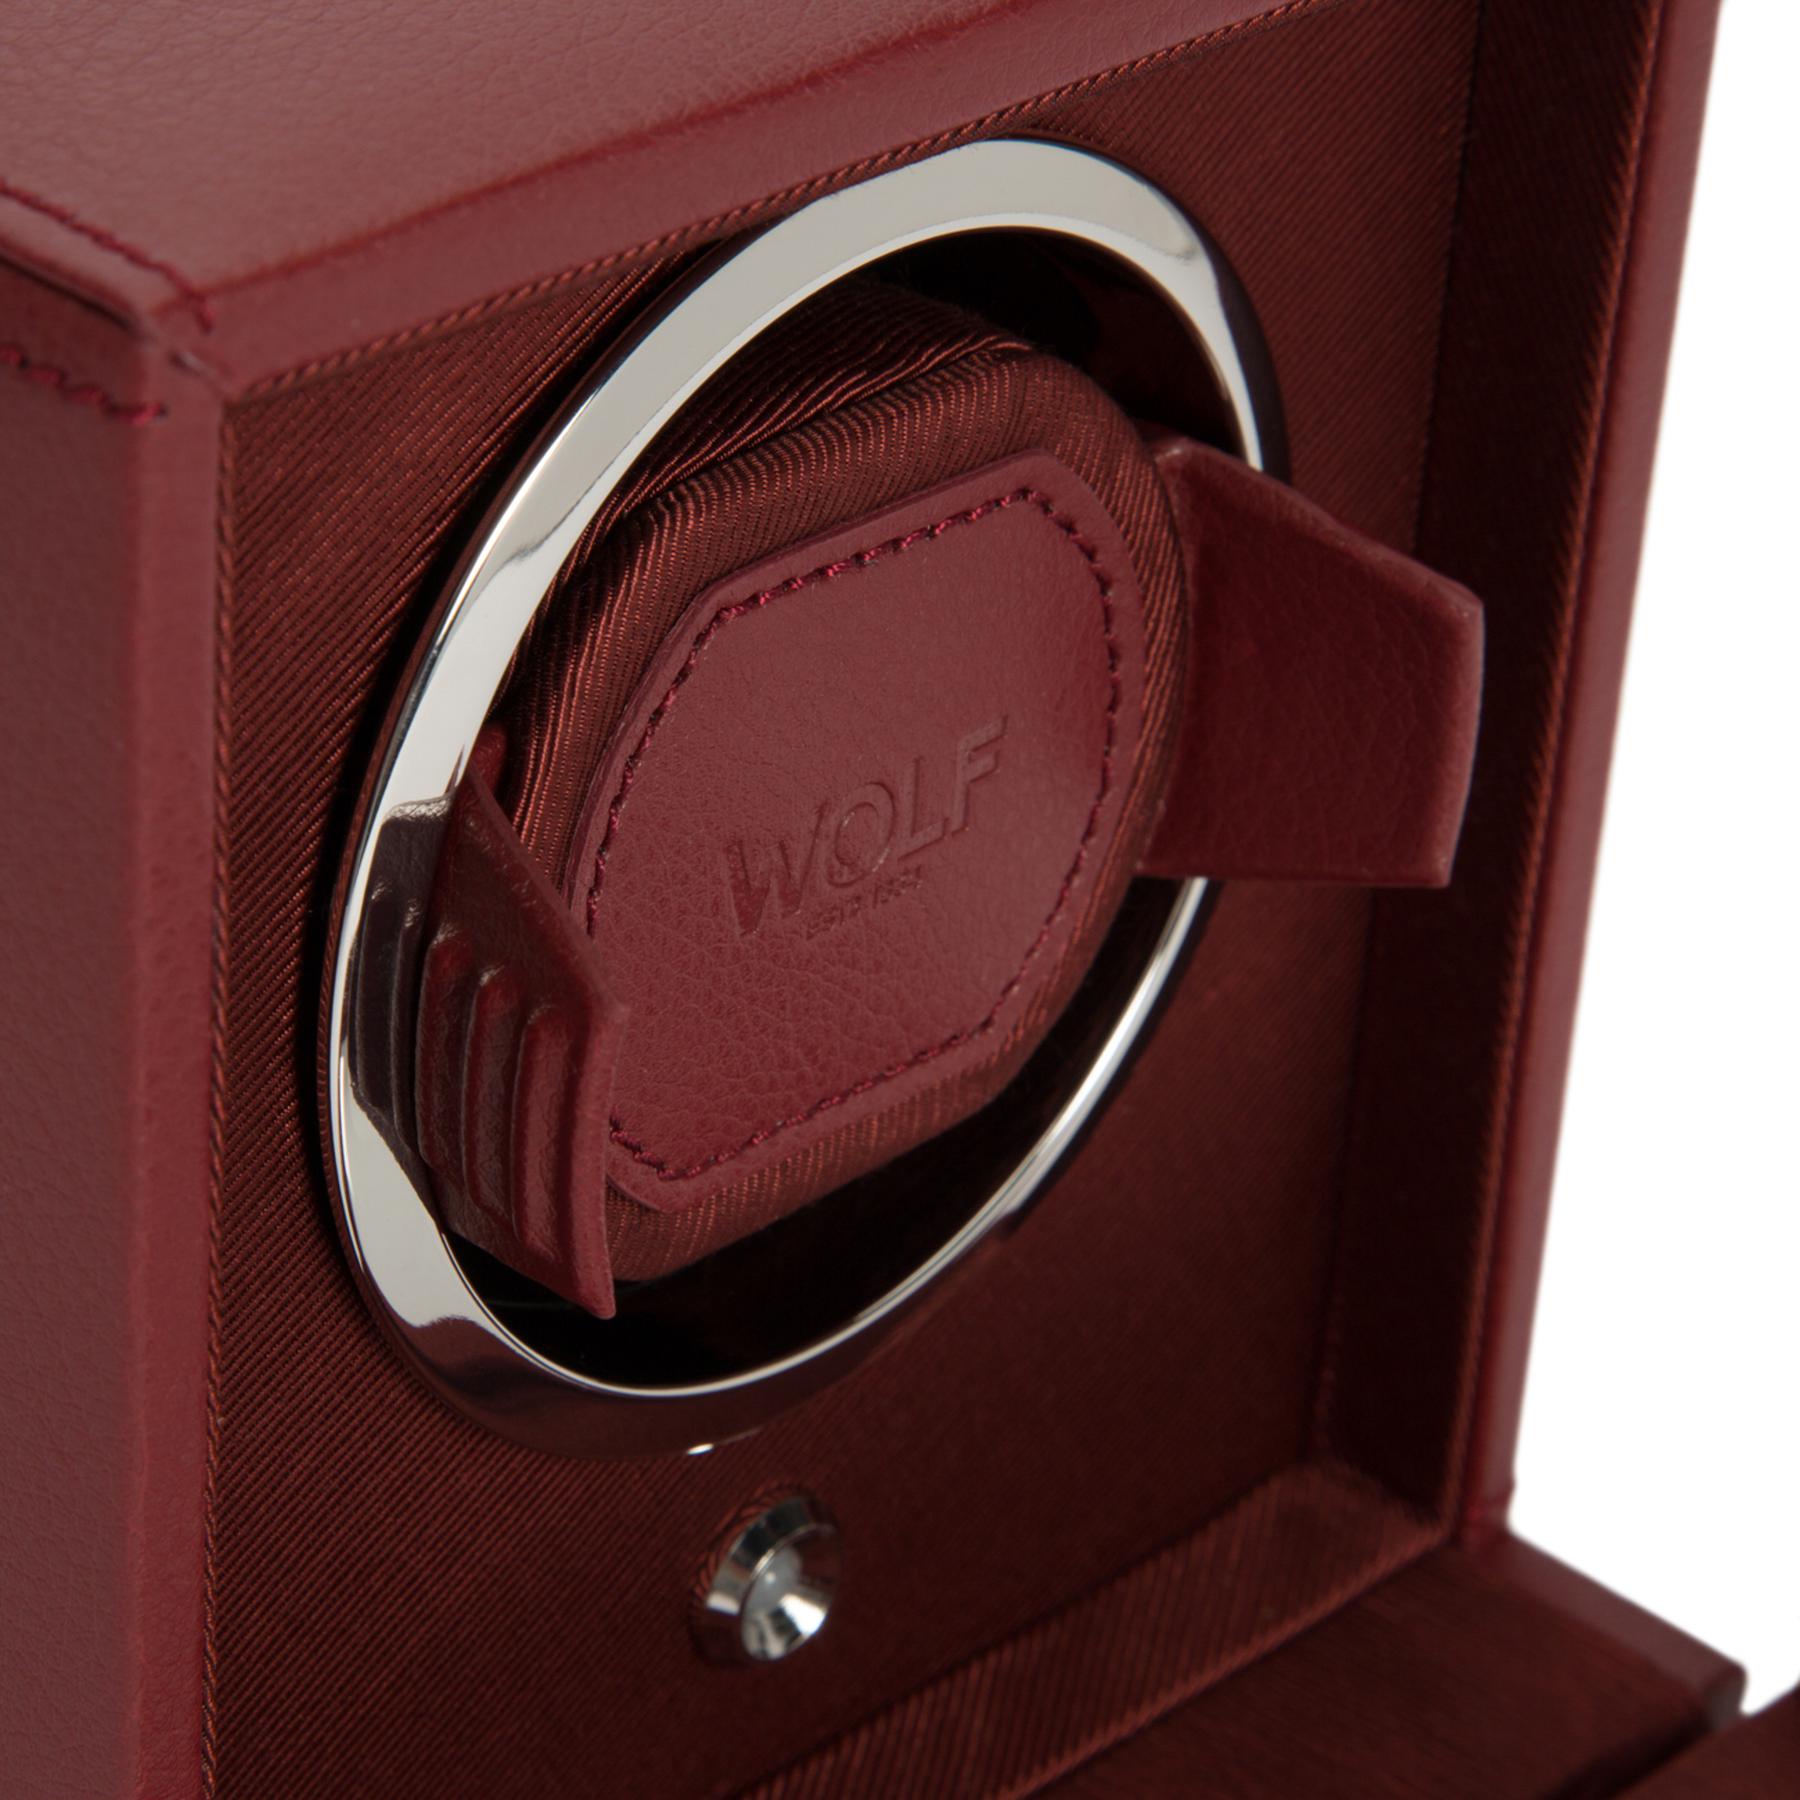 Bordeaux Single Watch Winder With Cover